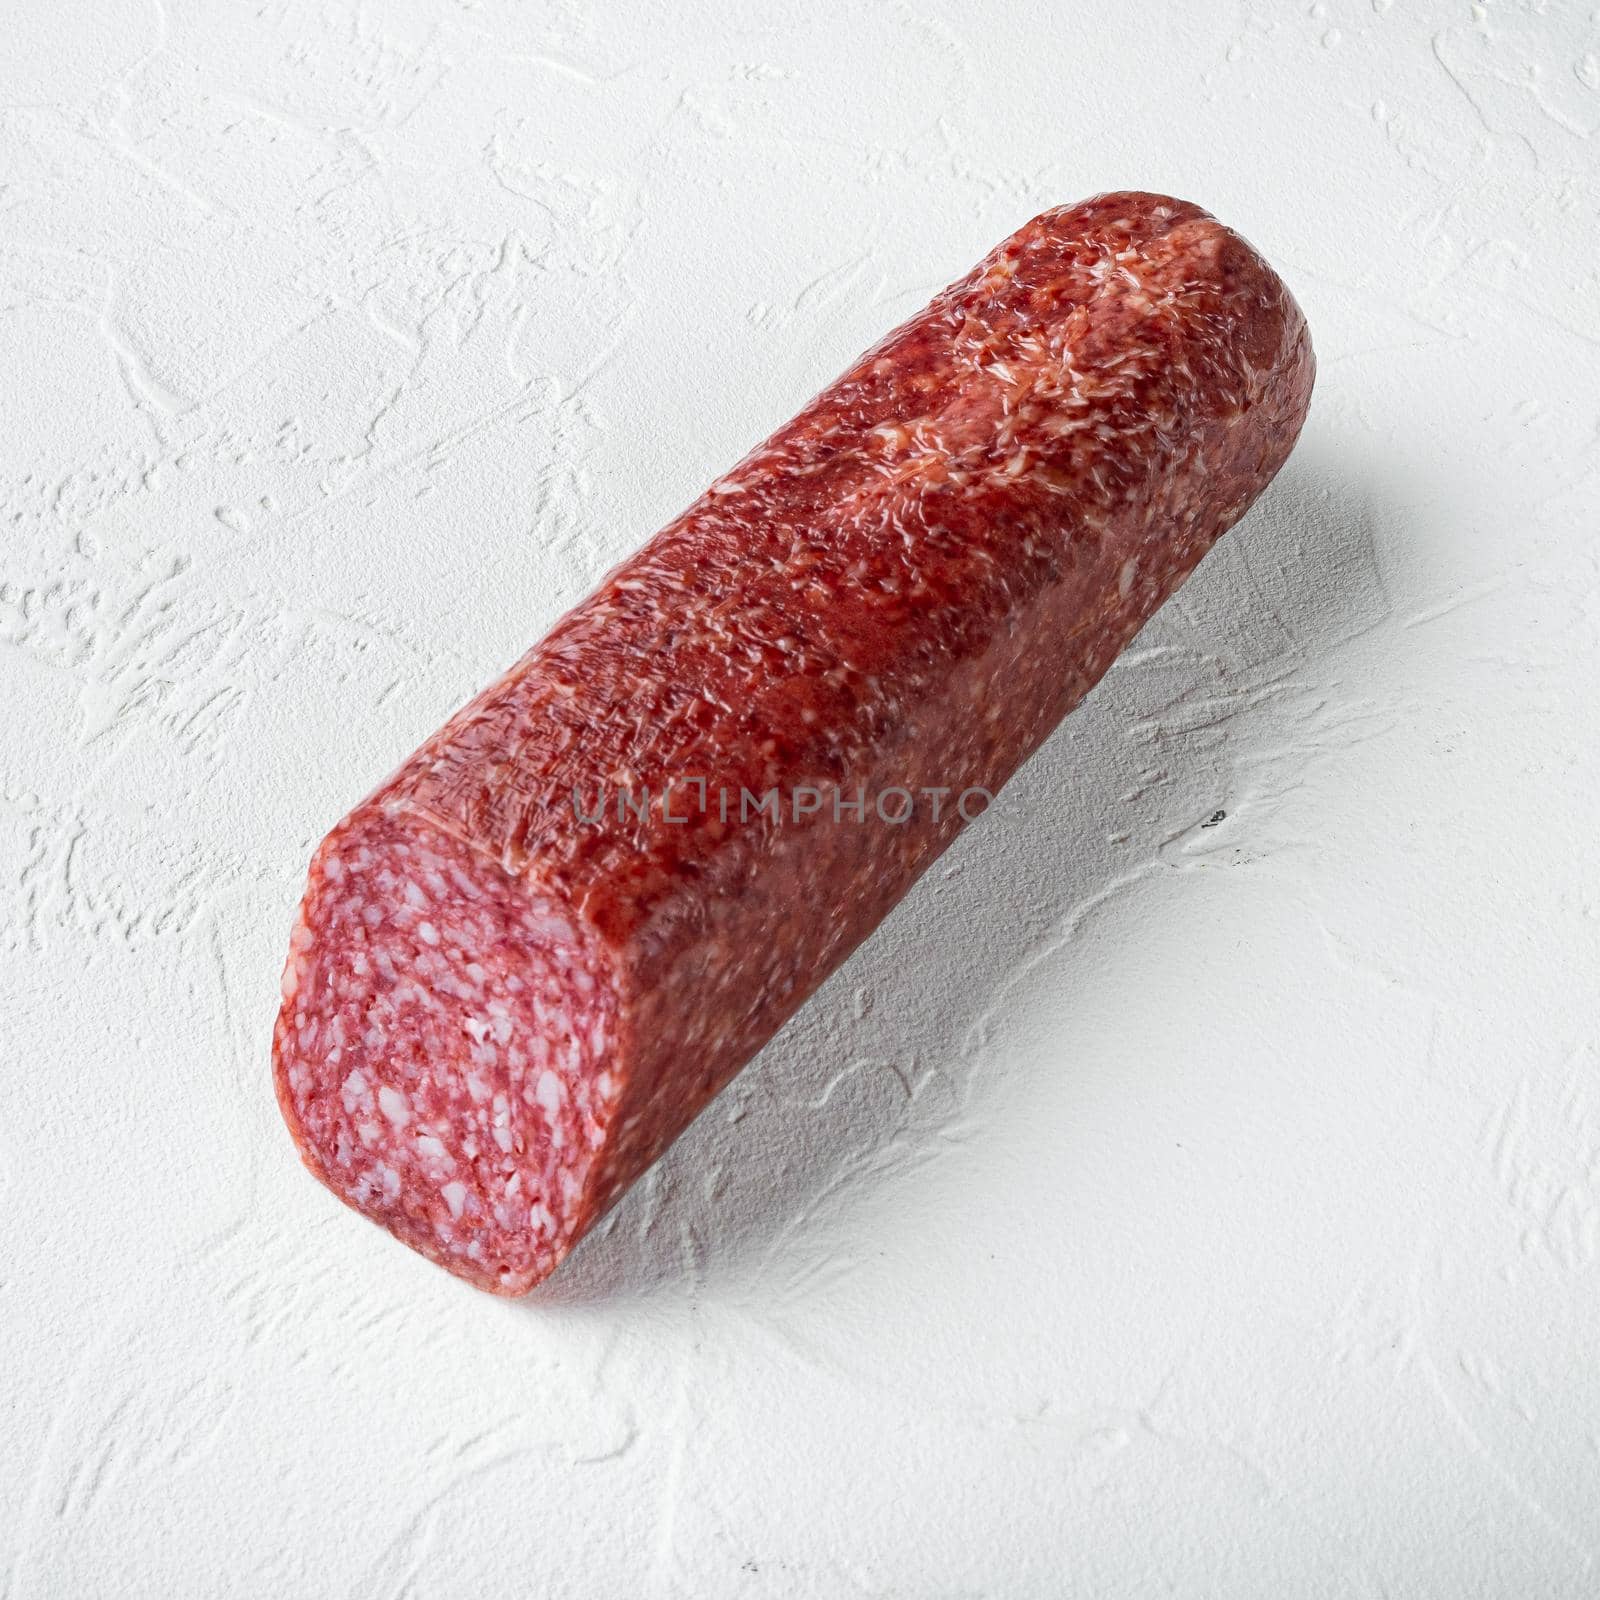 Traditional smoked salami sausage with spices set, square format, on white stone table background